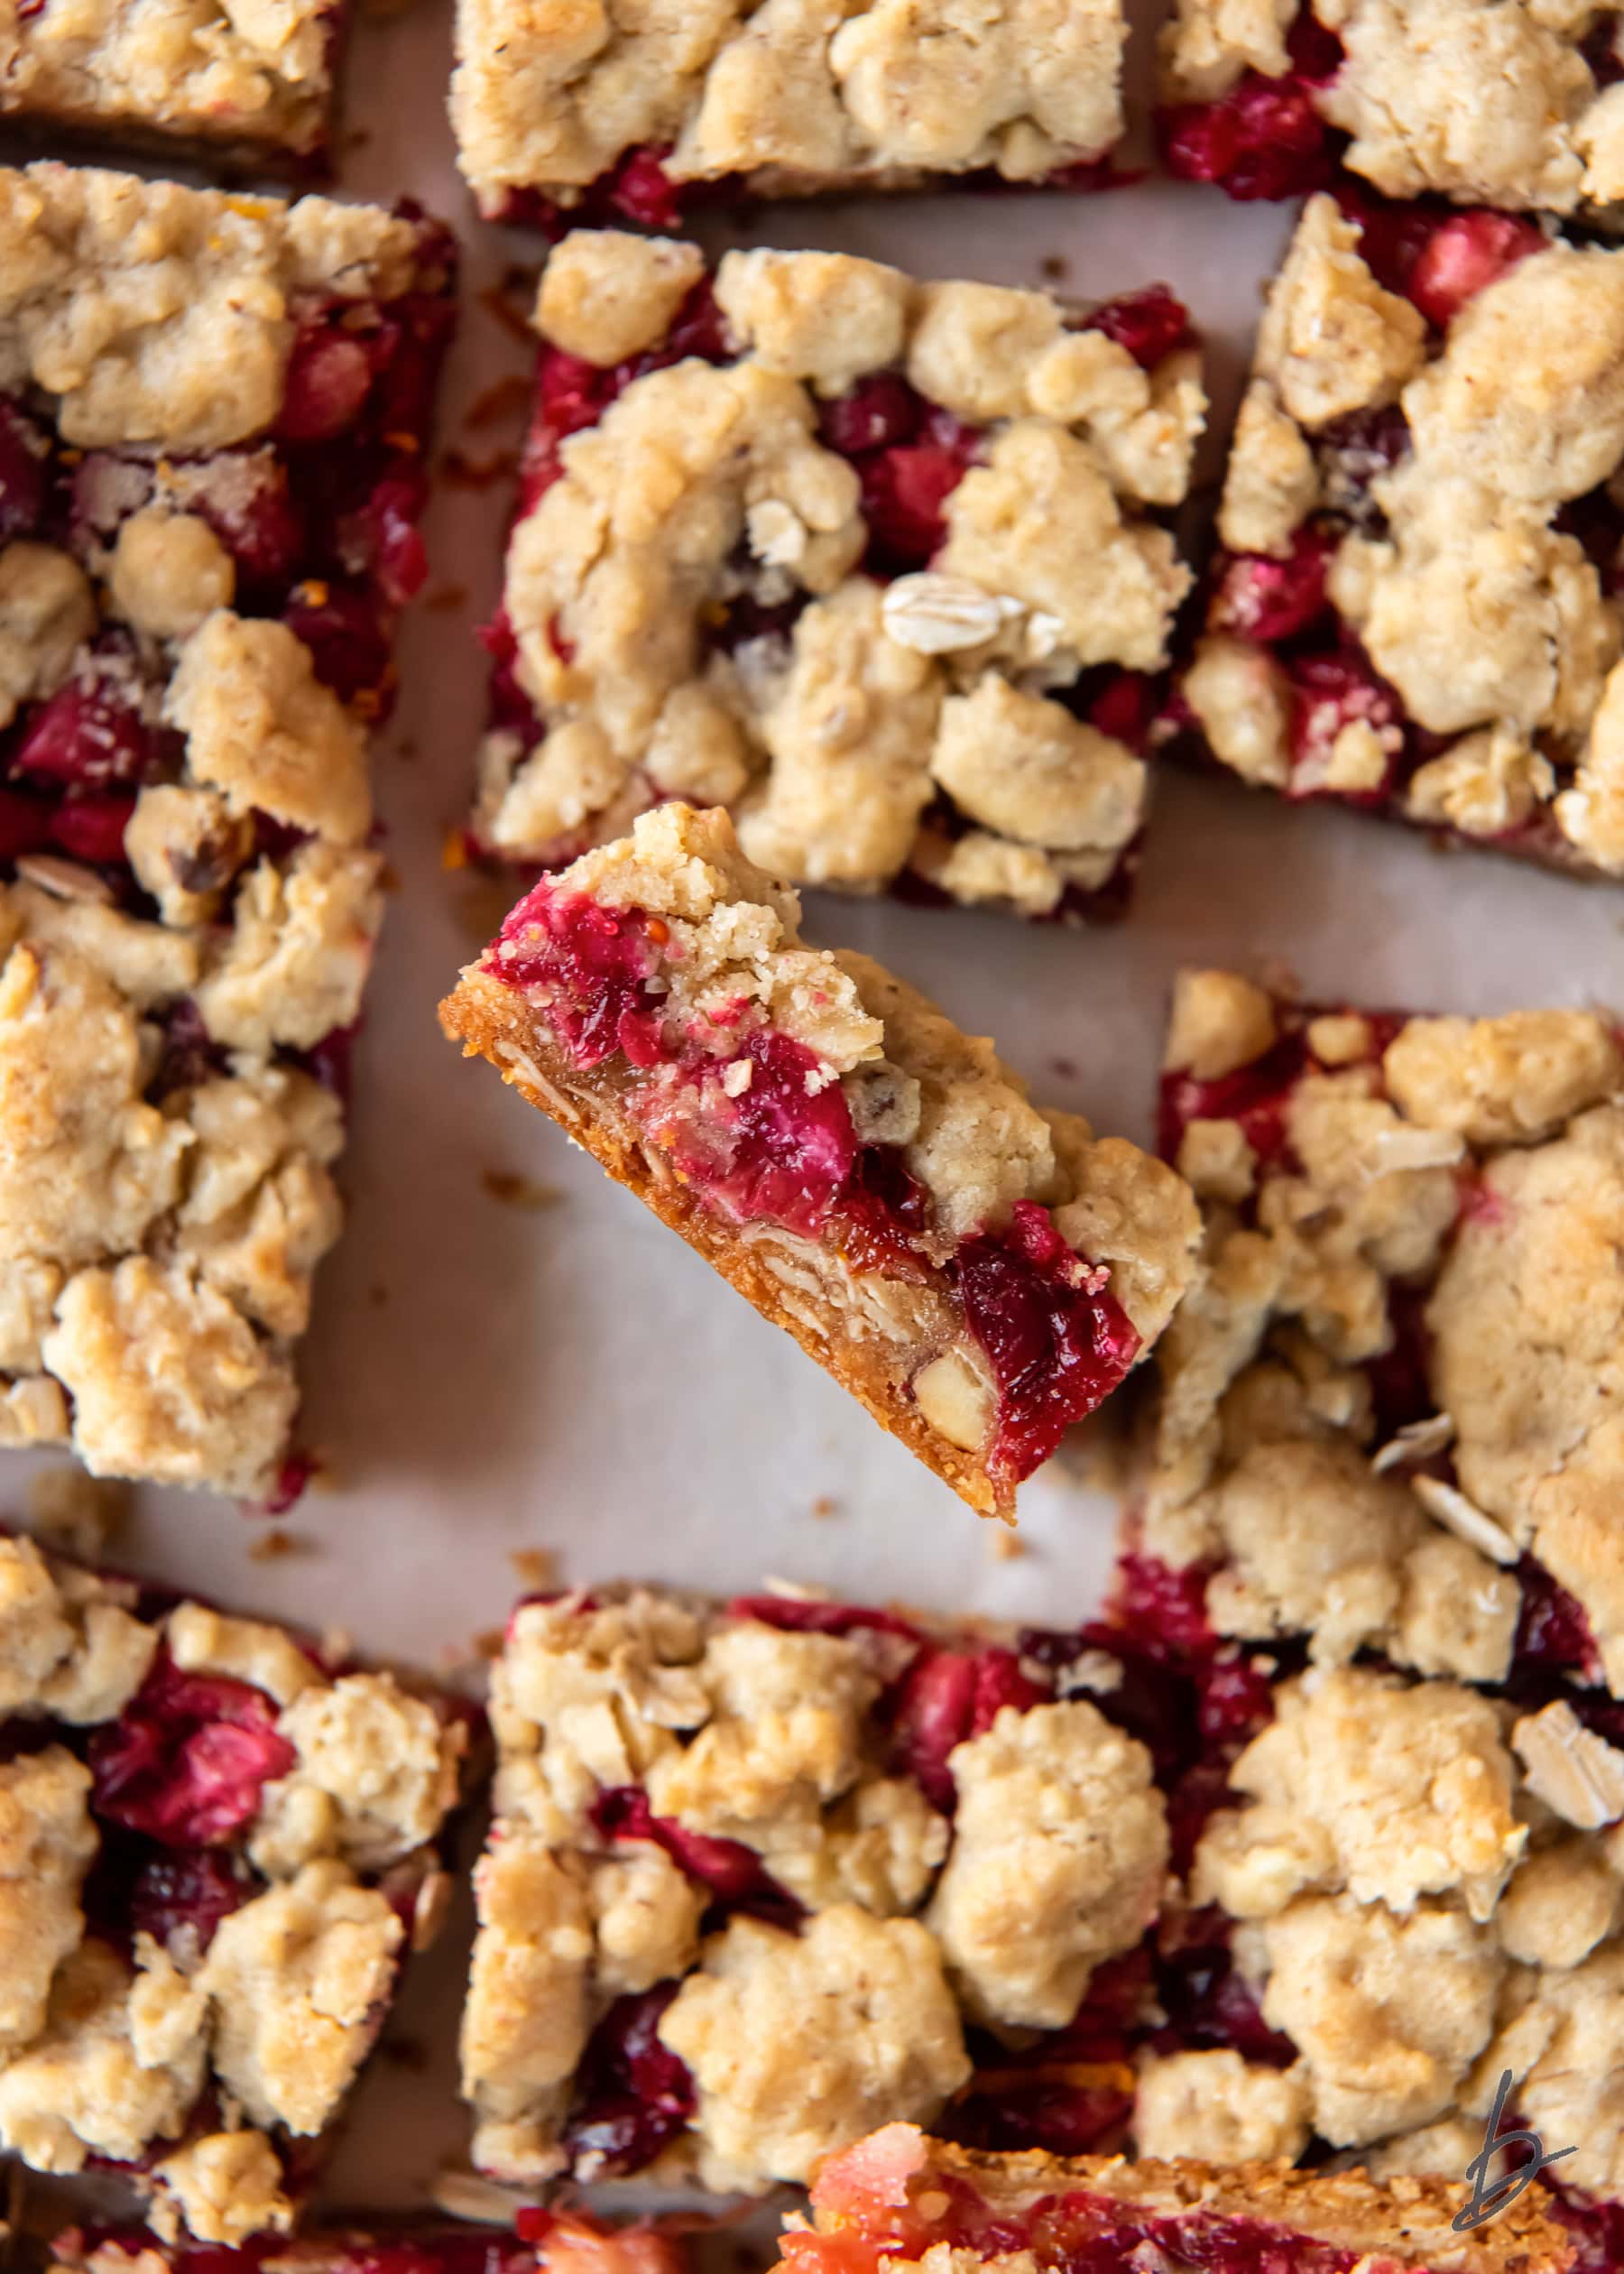 cranberry crumble bar on its side showing layers of crust, cranberry filling and crumb topping.